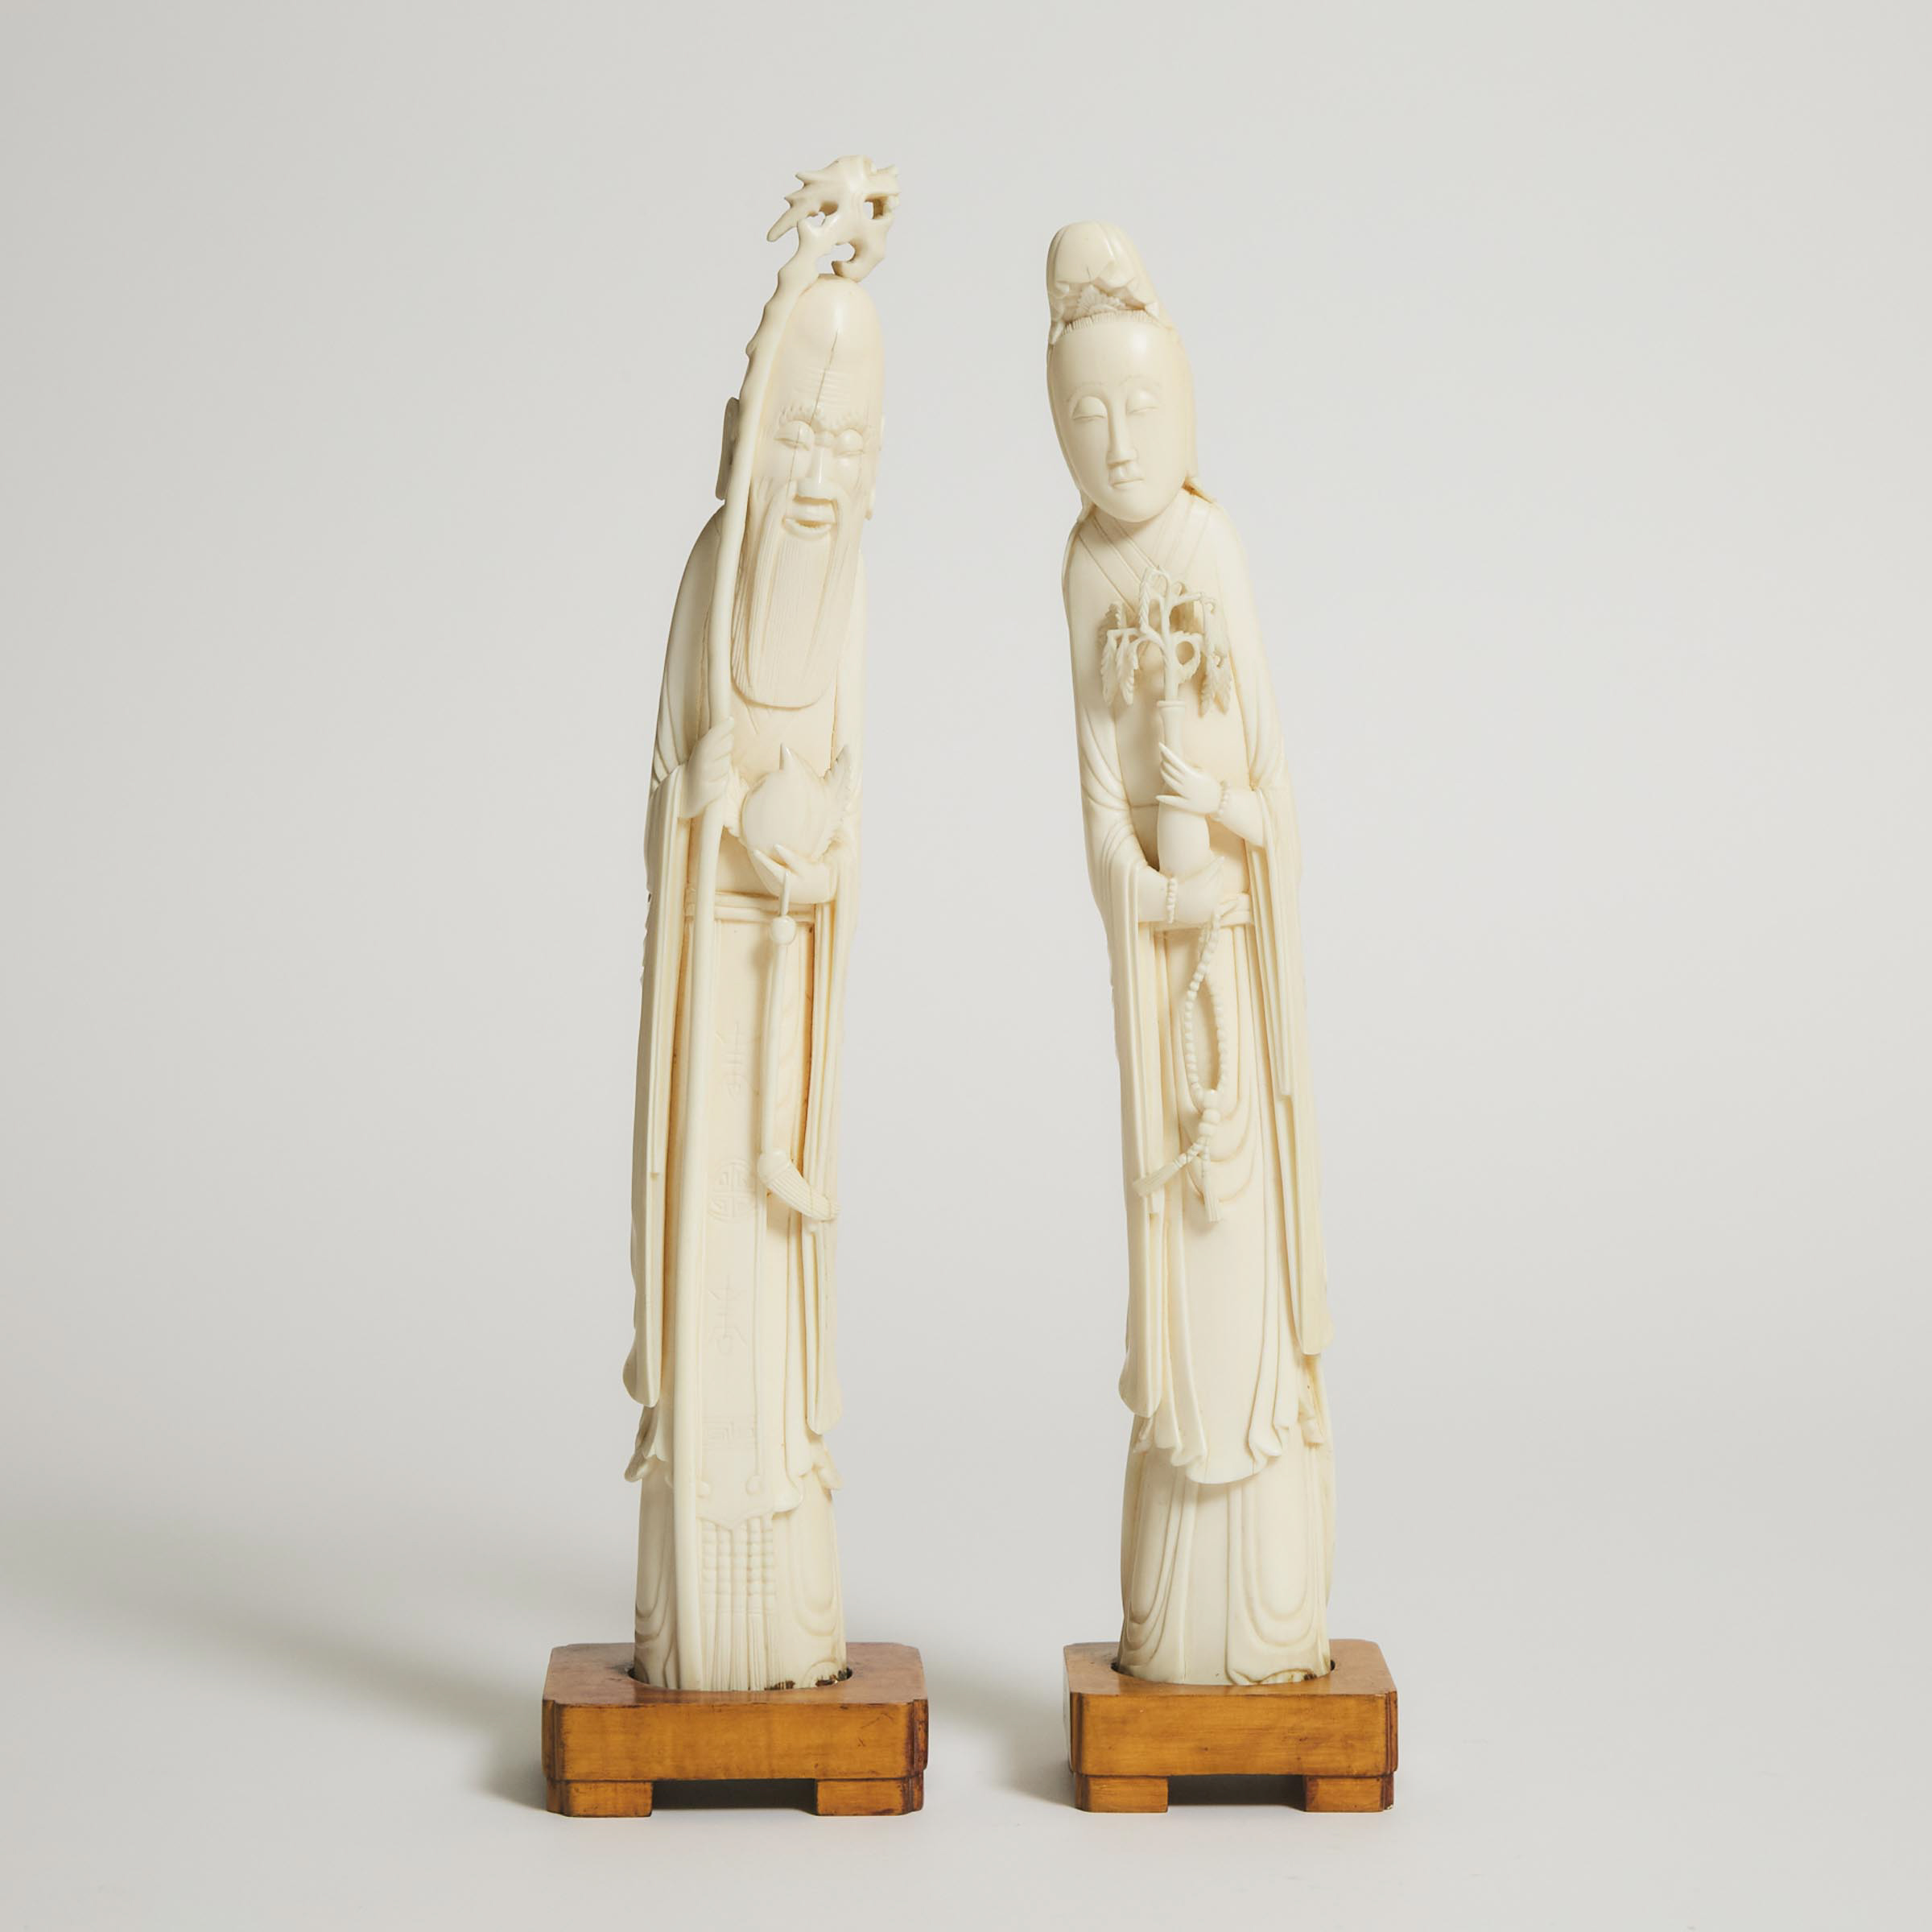 A Pair of Ivory Figures of Shoulao 2fb0677